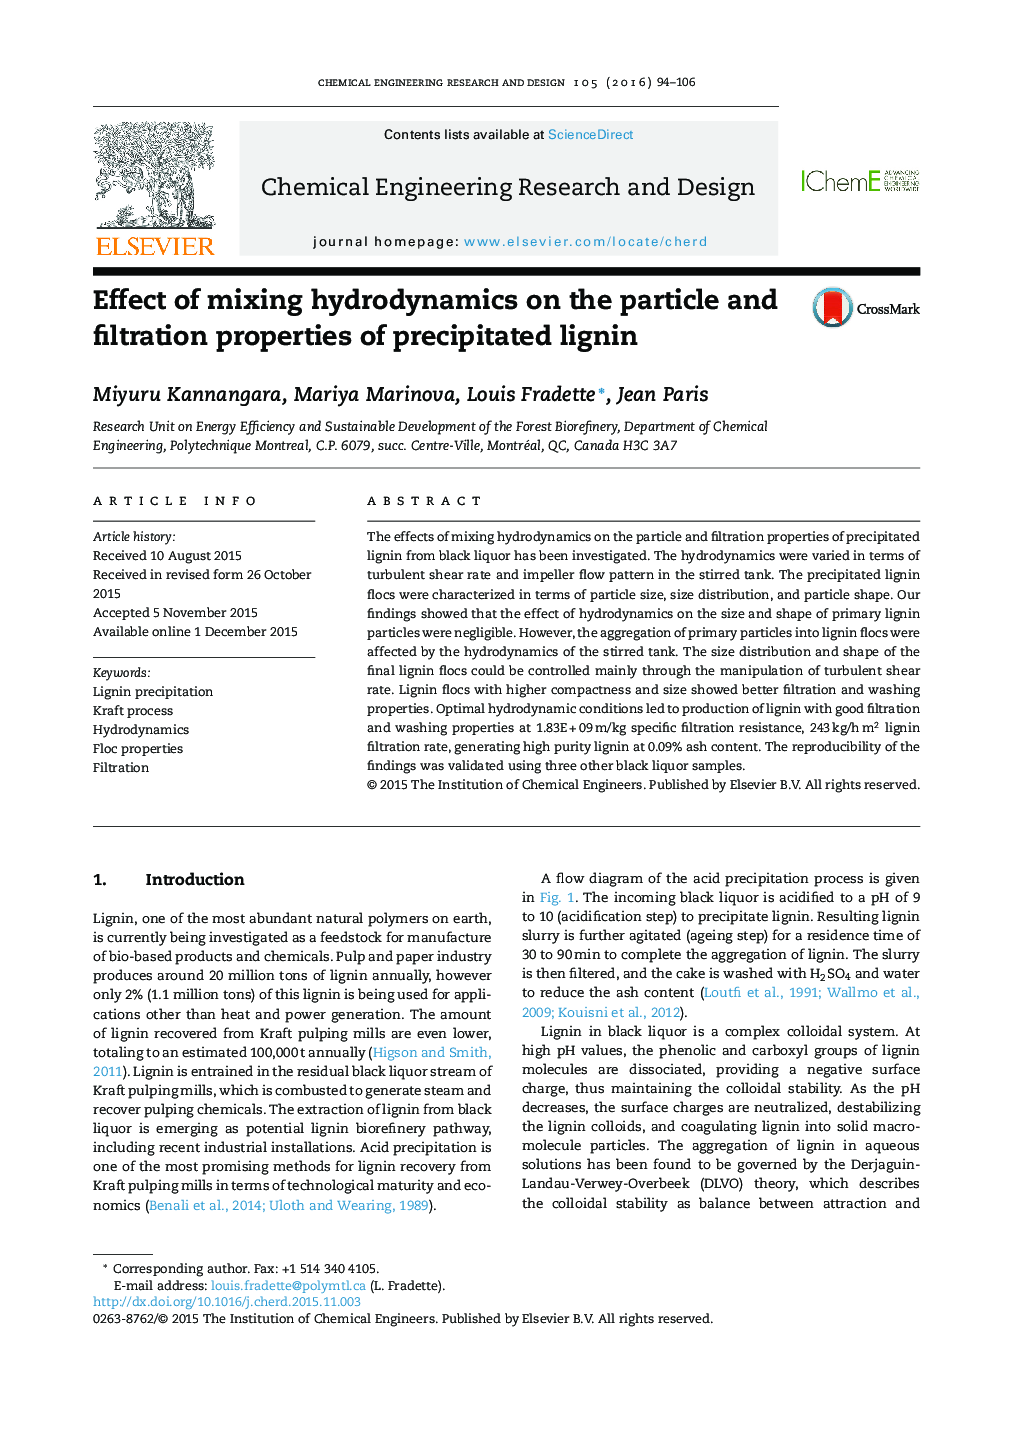 Effect of mixing hydrodynamics on the particle and filtration properties of precipitated lignin